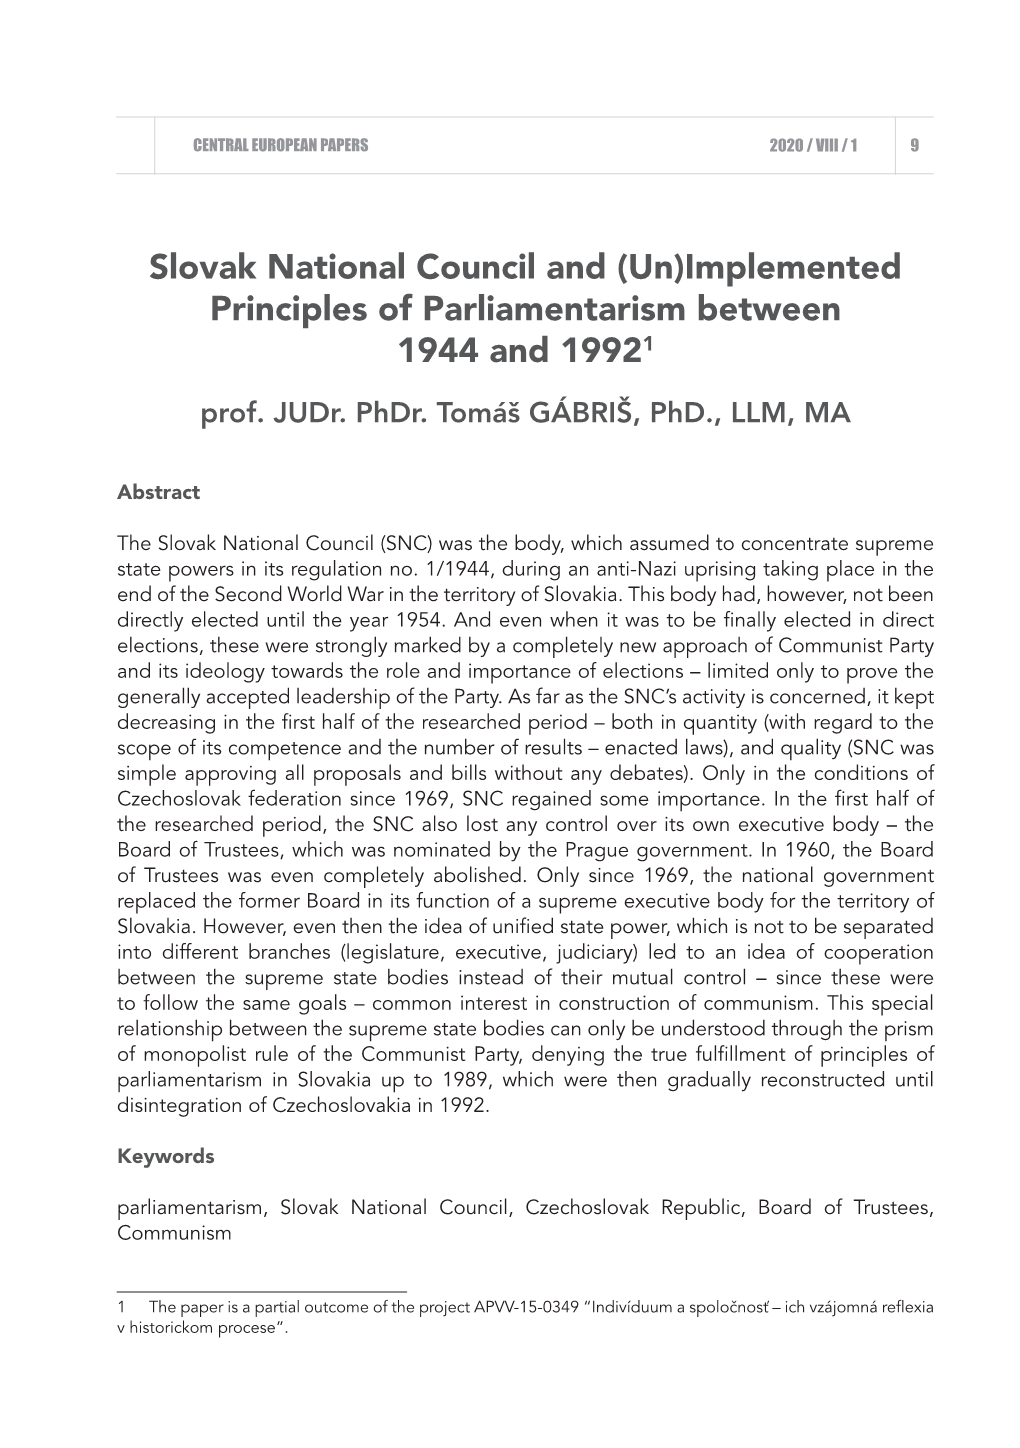 Slovak National Council and (Un)Implemented Principles of Parliamentarism Between 1944 and 19921 Prof